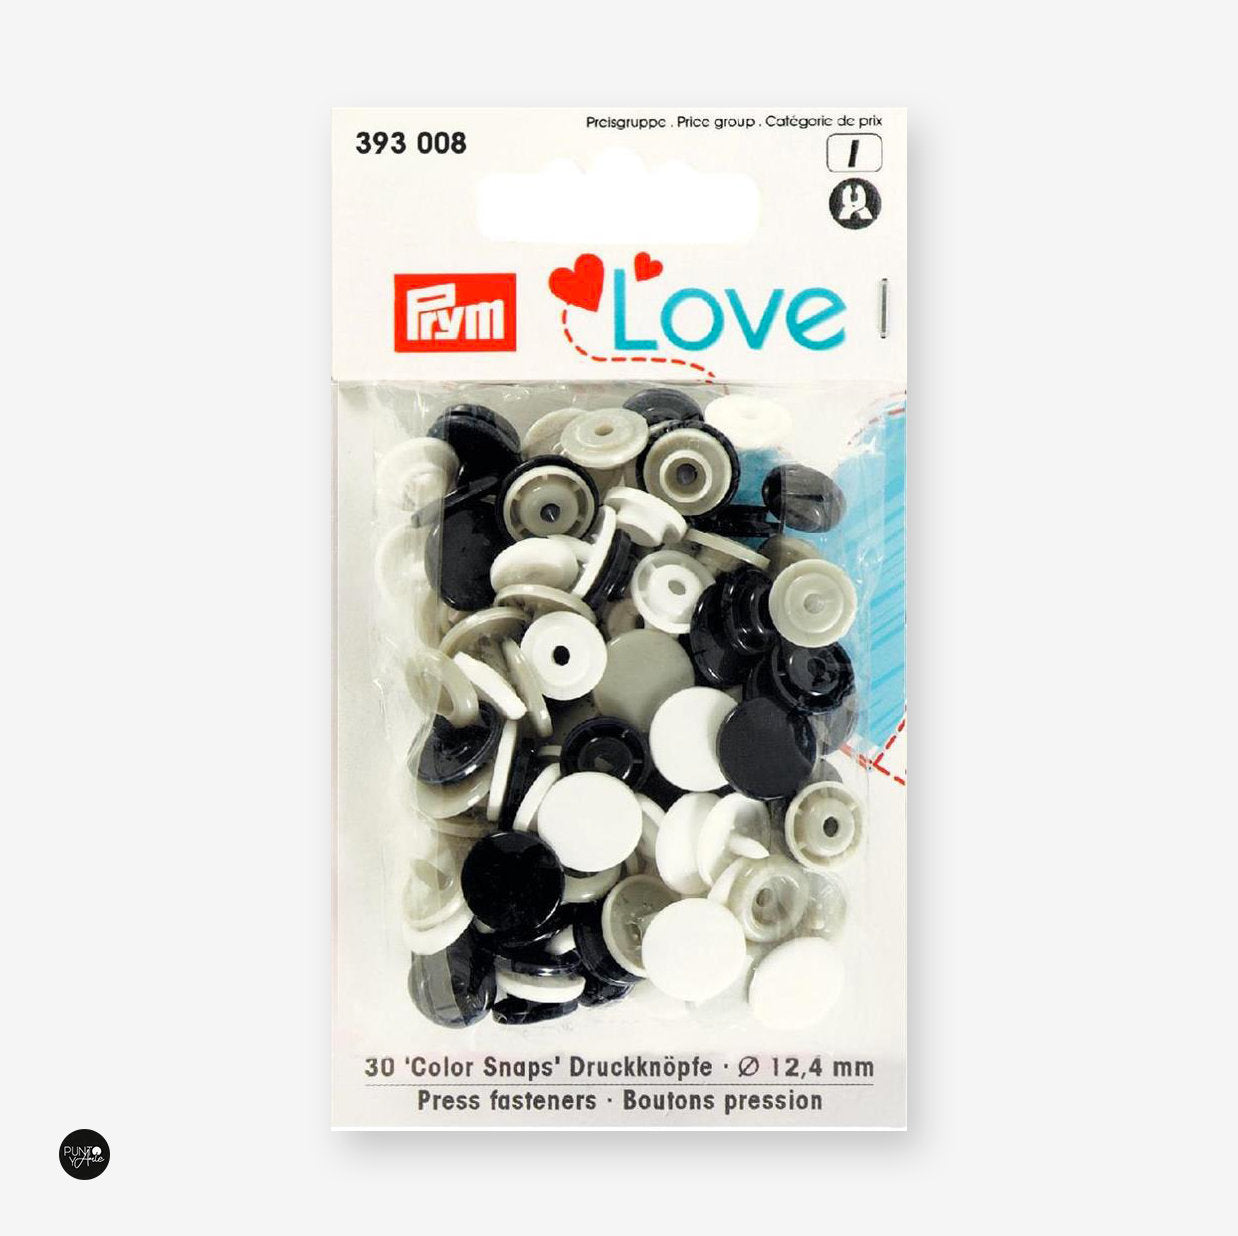 Press Buttons Or Snaps 12.44 mm - Prym Love 393008